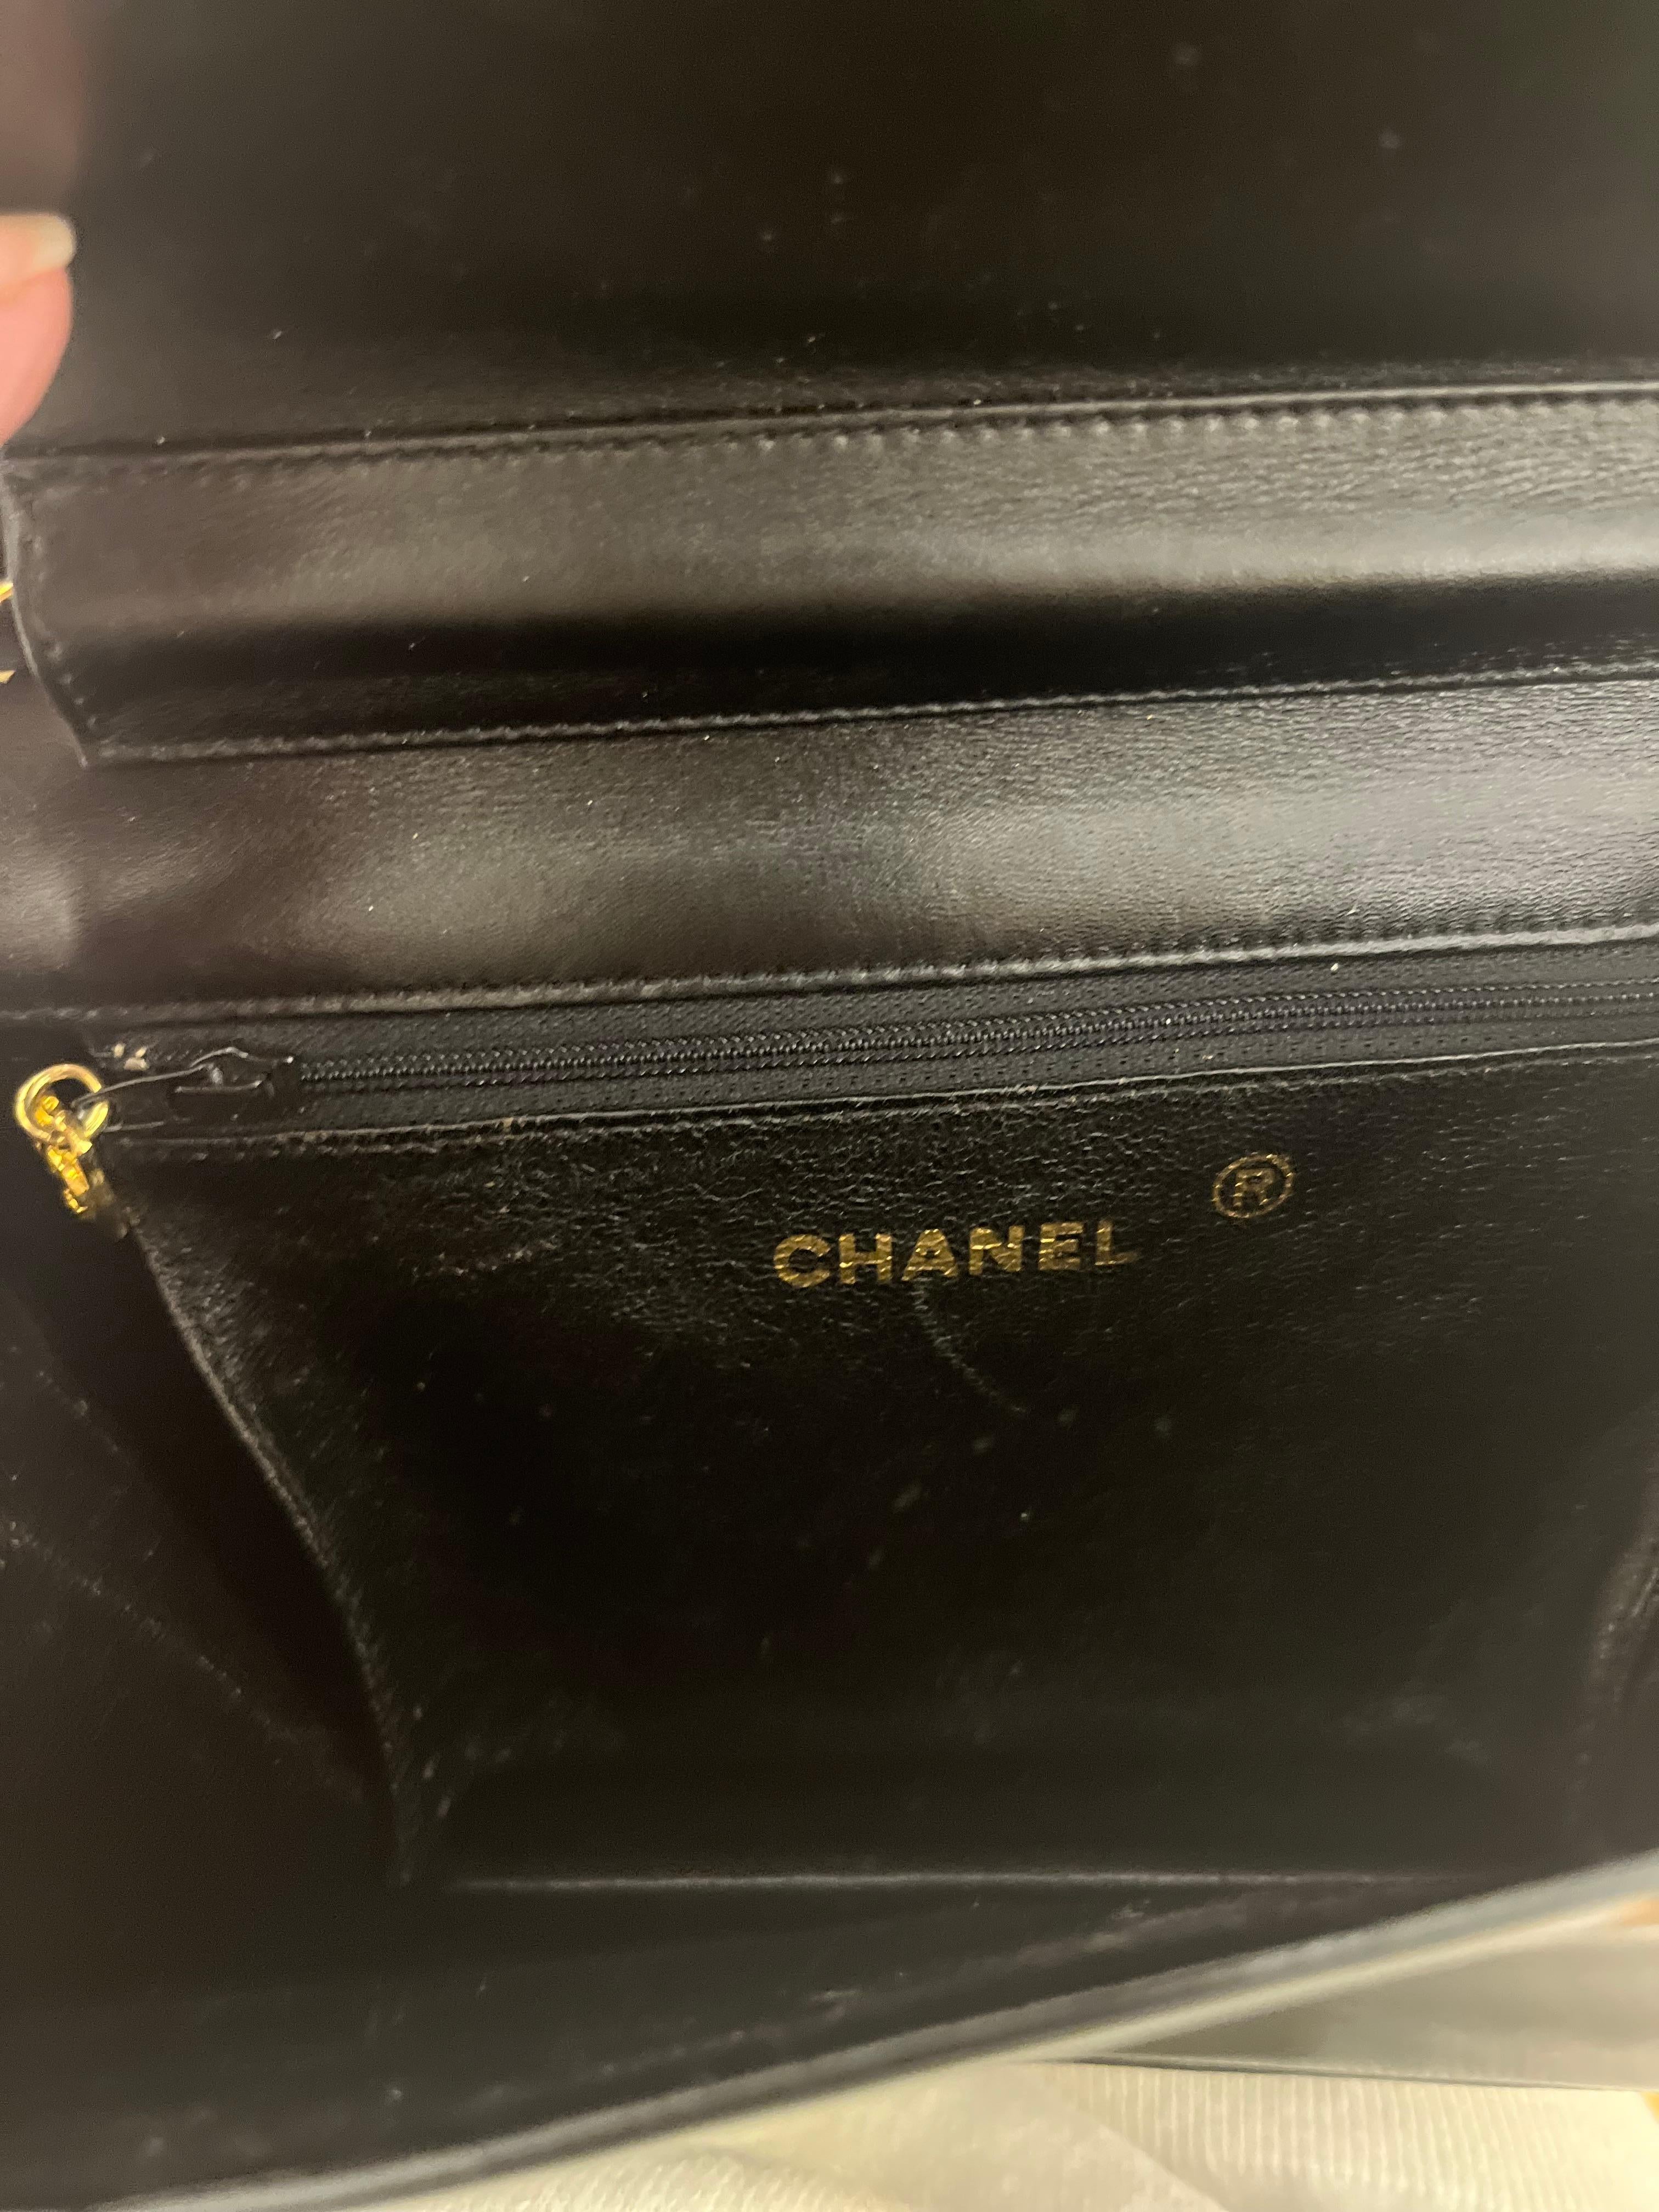 1986-88 Chanel Black Patent Leather Handbag w/COA and Card For Sale 3